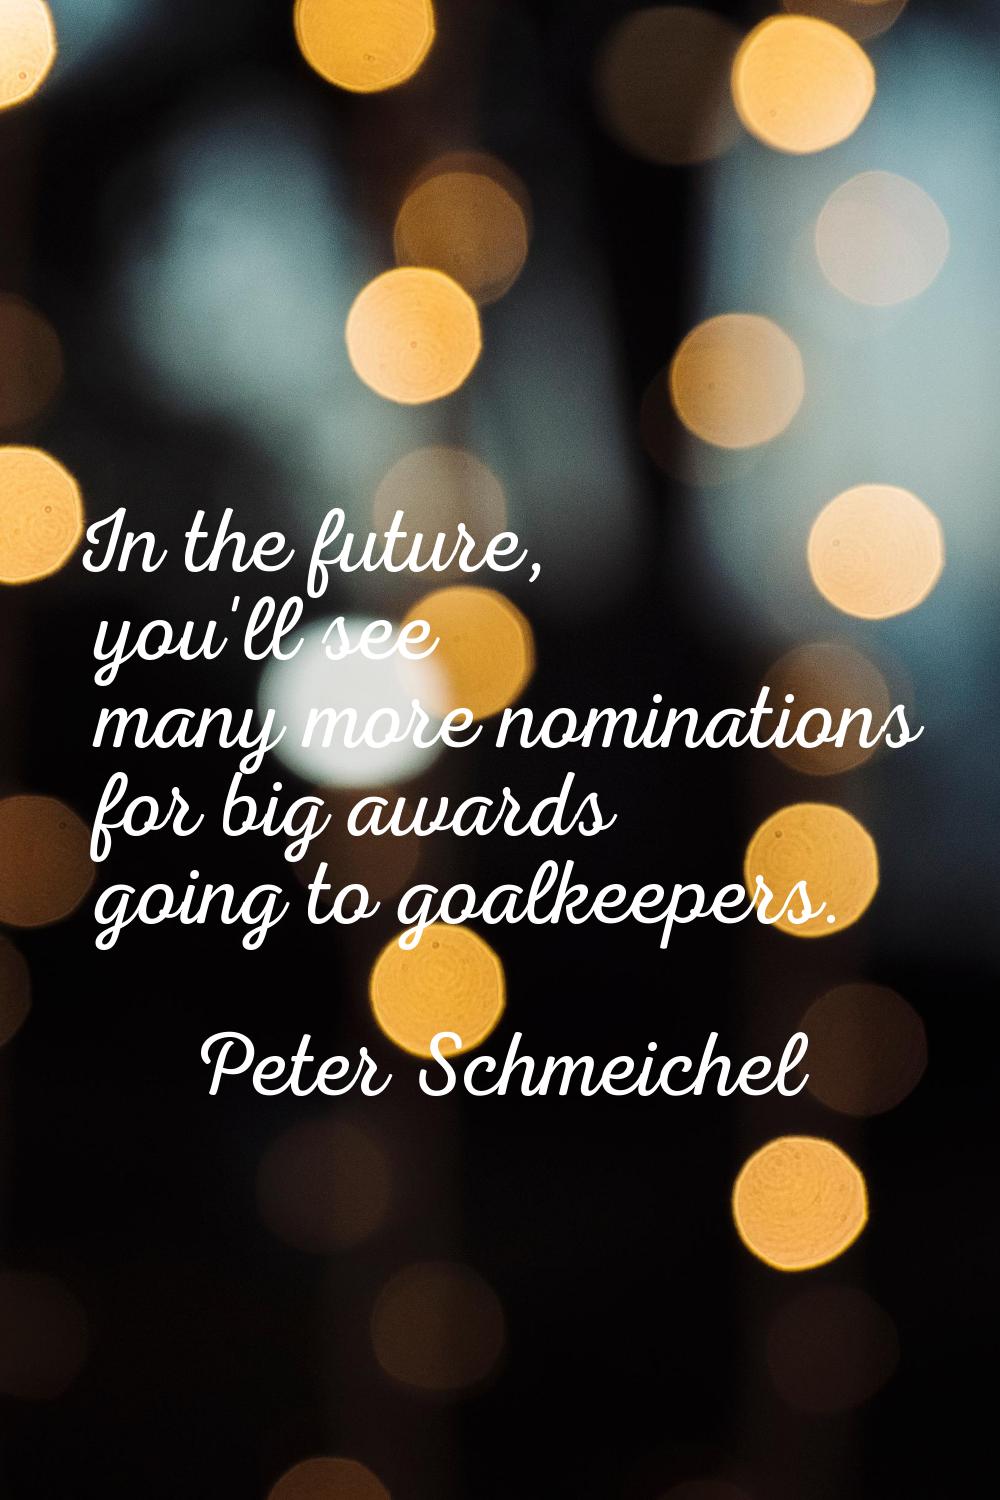 In the future, you'll see many more nominations for big awards going to goalkeepers.